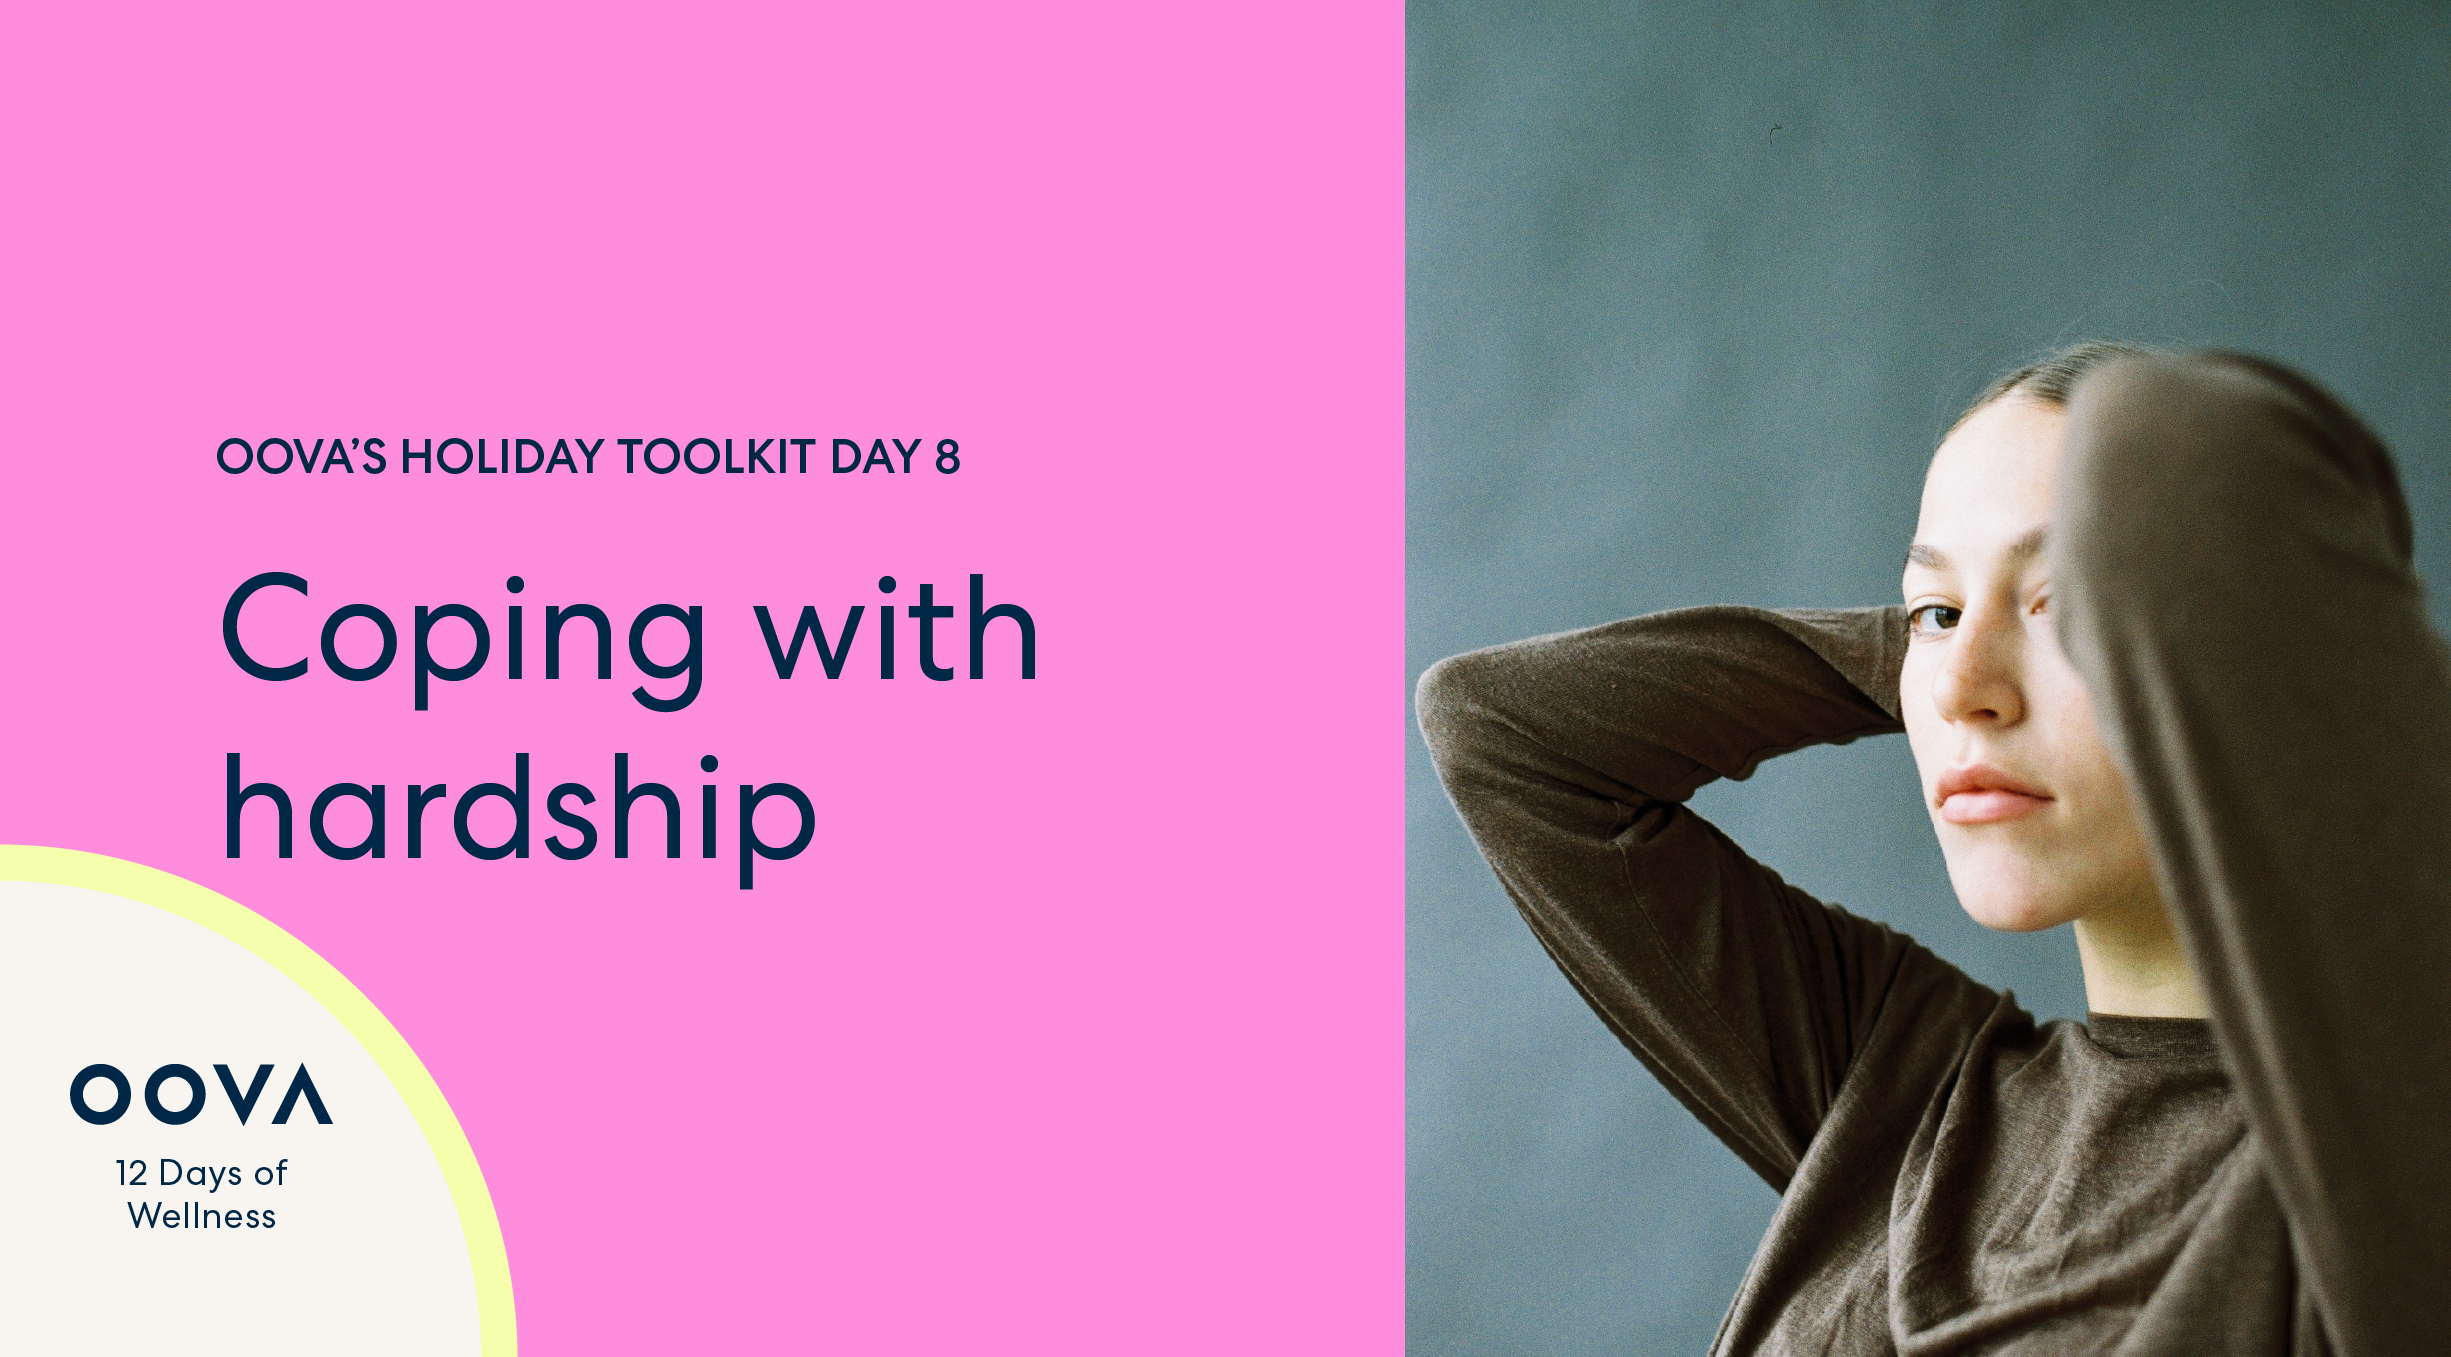 Holiday Toolkit Day 8: Coping with Hardship